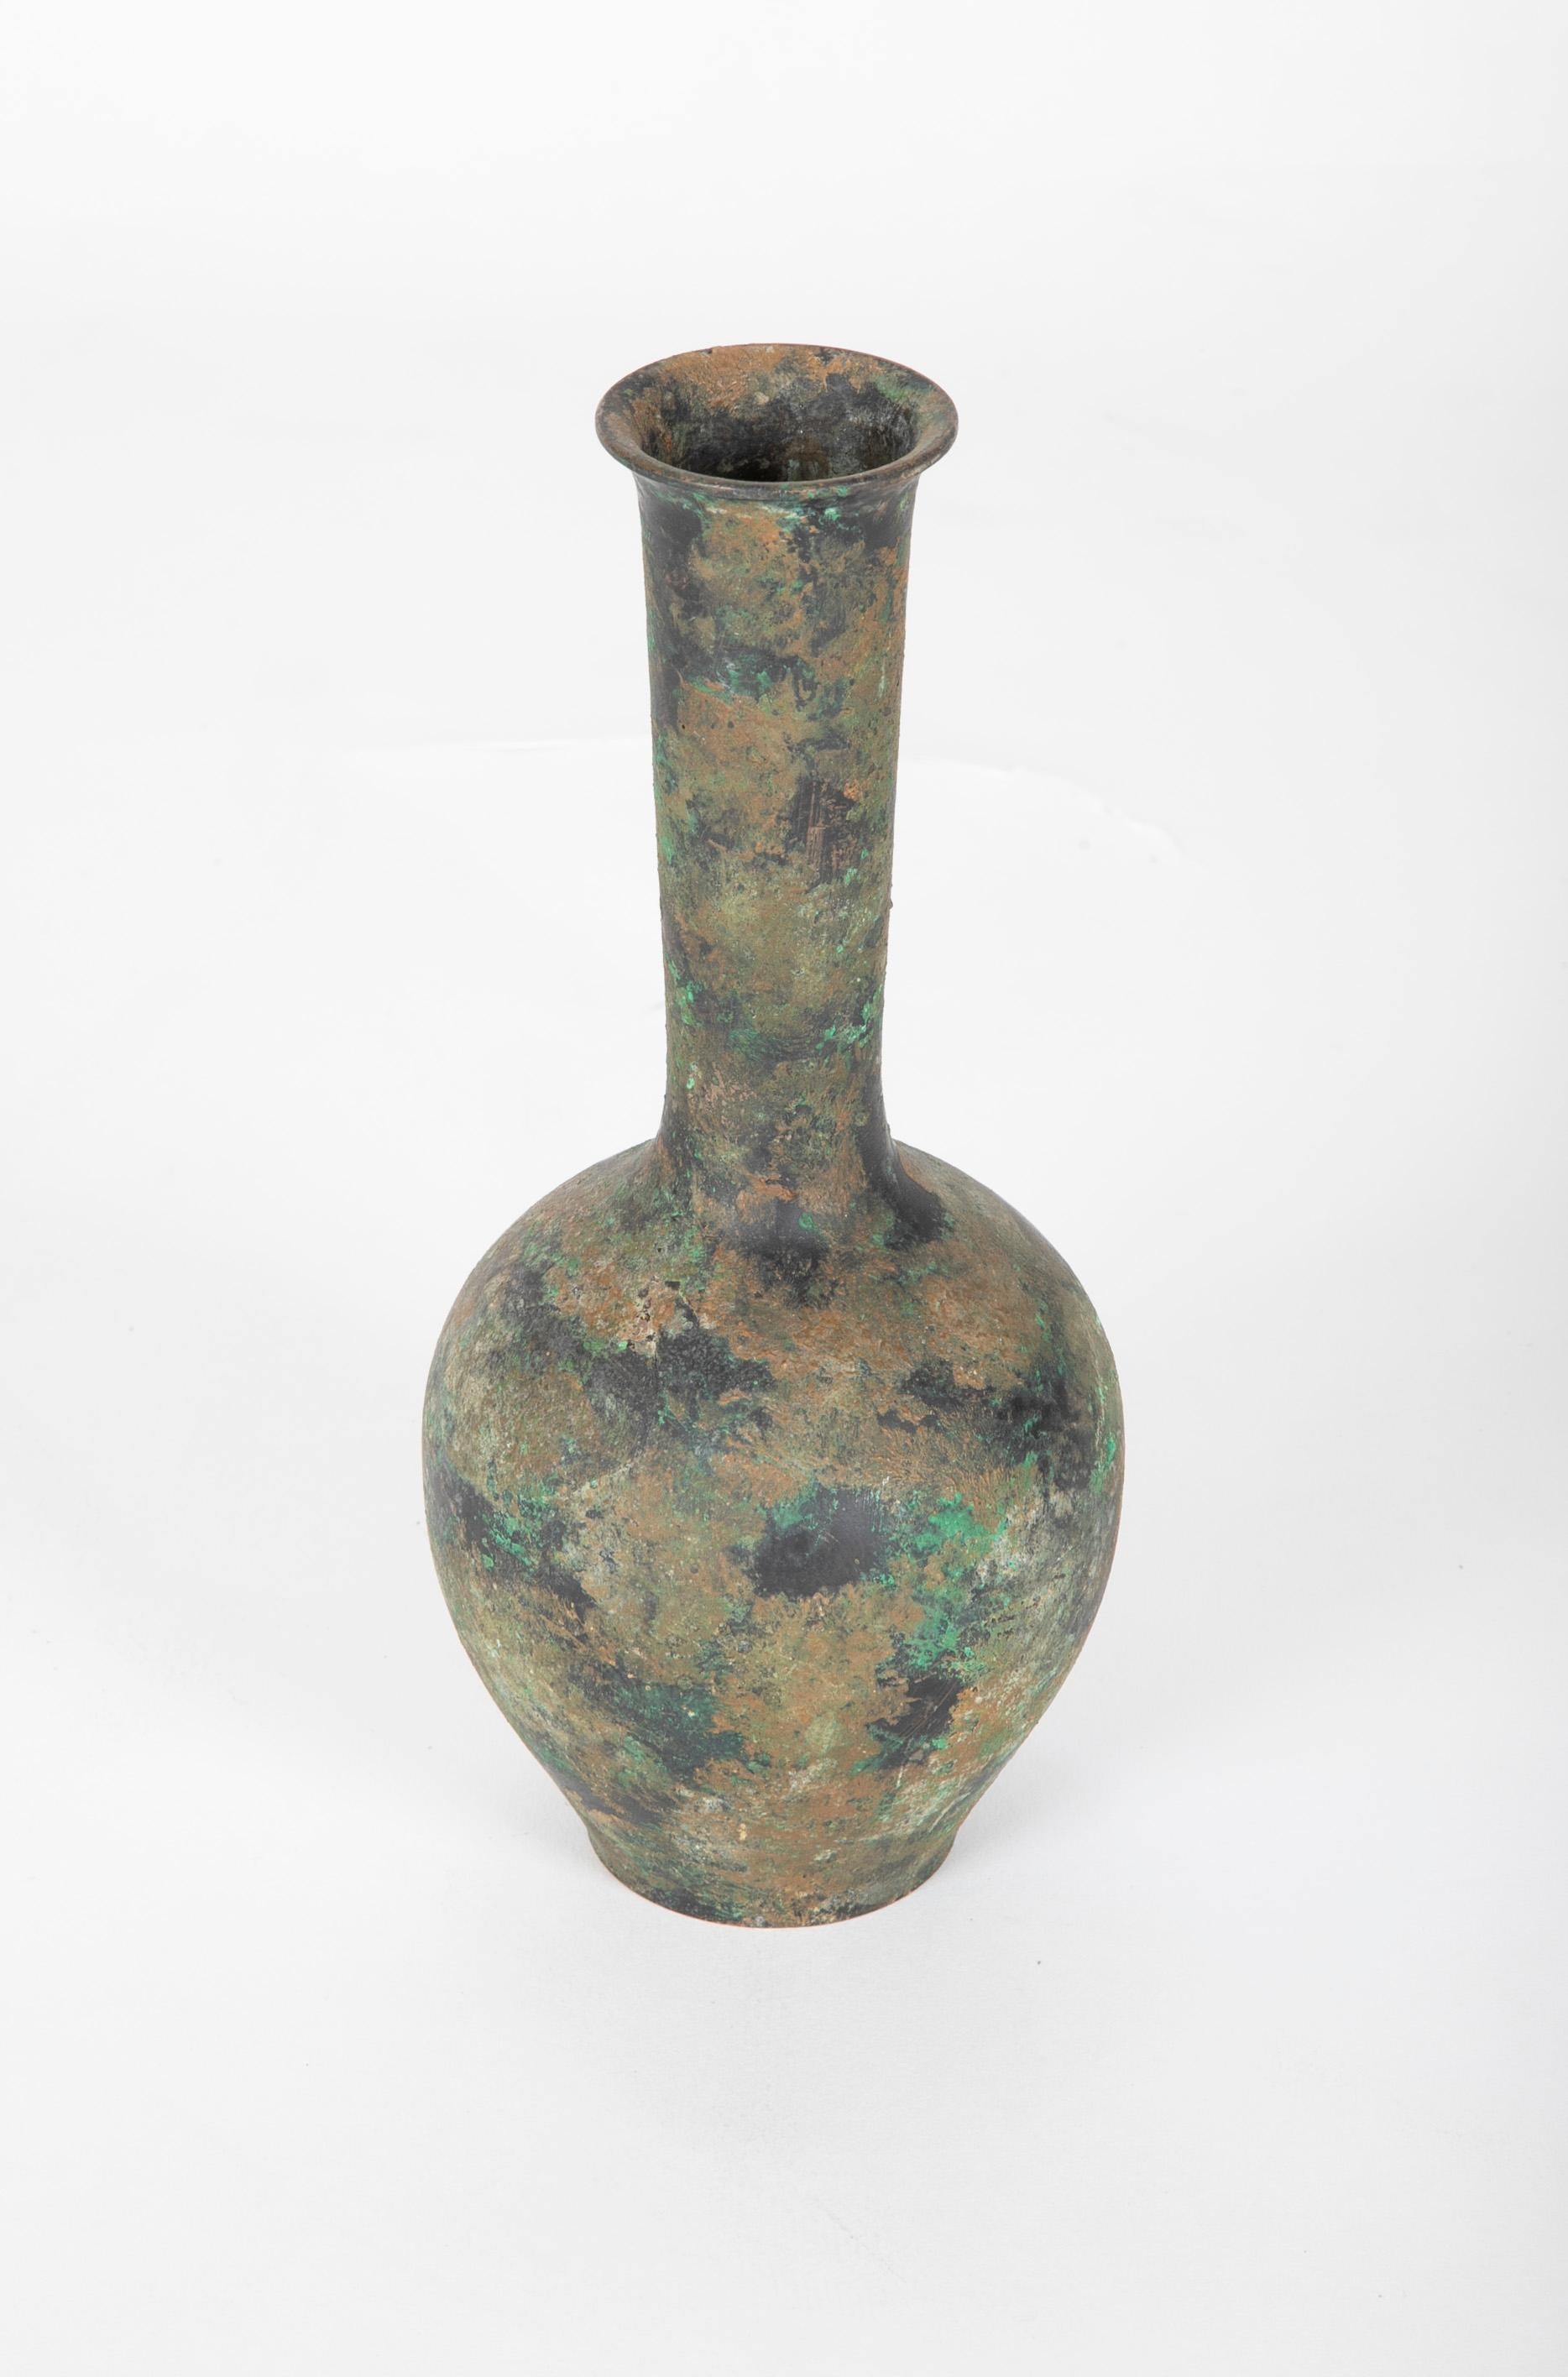 A handsome bronze bottle-form vase in the Chinese Archaistic style. The flaring neck above a bulbous body supported by a circular footed base. Encrusted surface nice showing a variegated patina, late 19th-early 20th century.